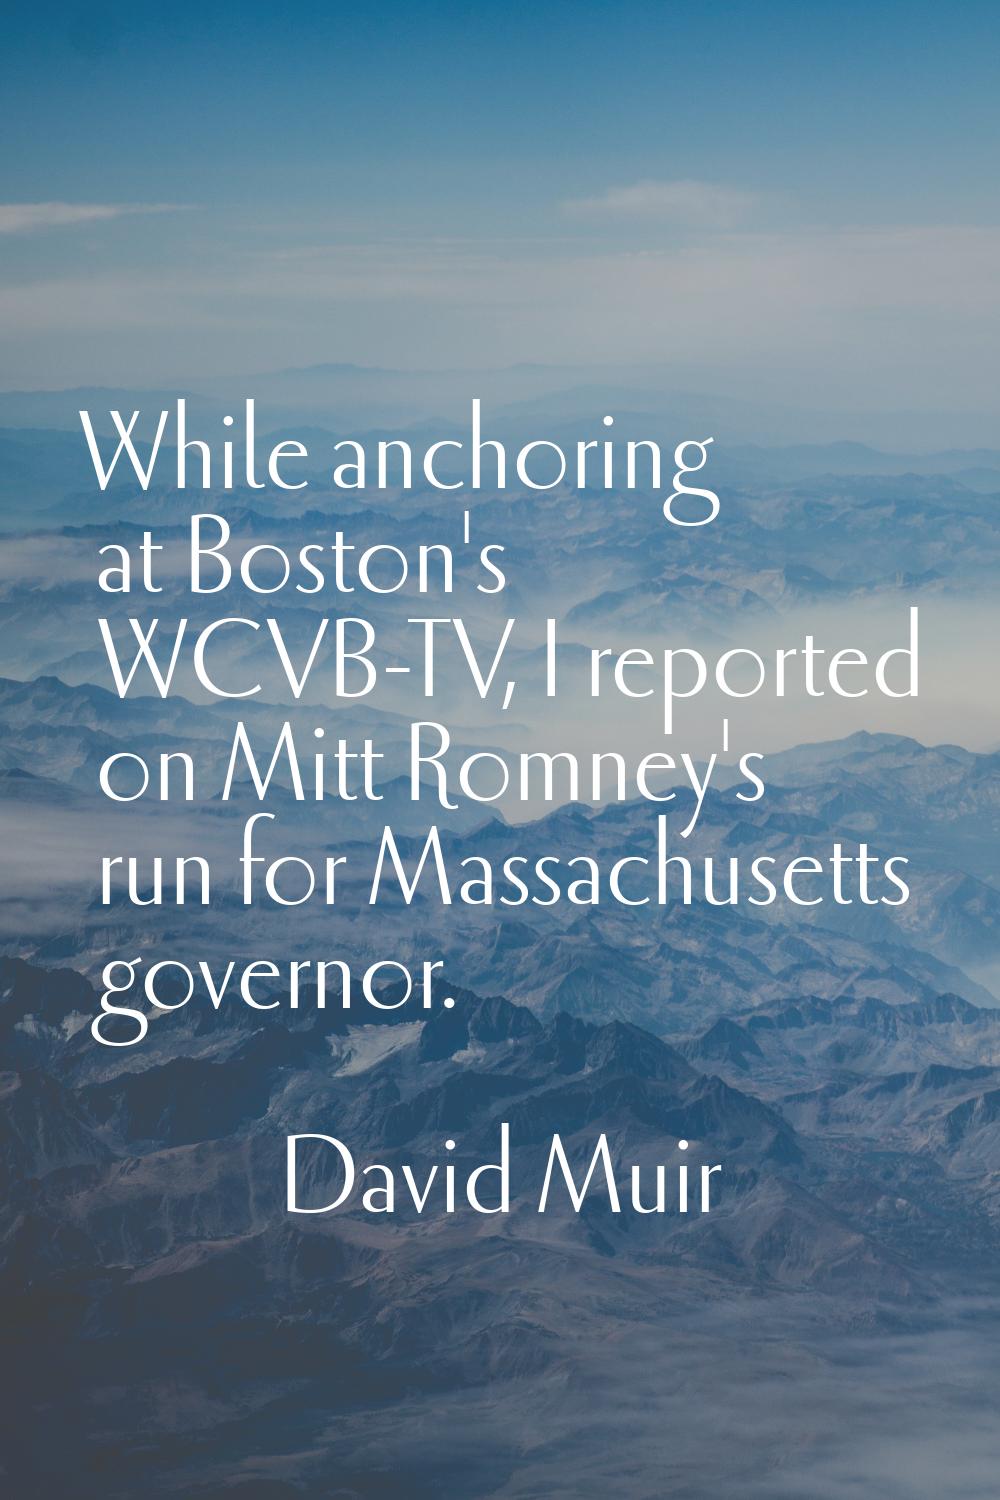 While anchoring at Boston's WCVB-TV, I reported on Mitt Romney's run for Massachusetts governor.